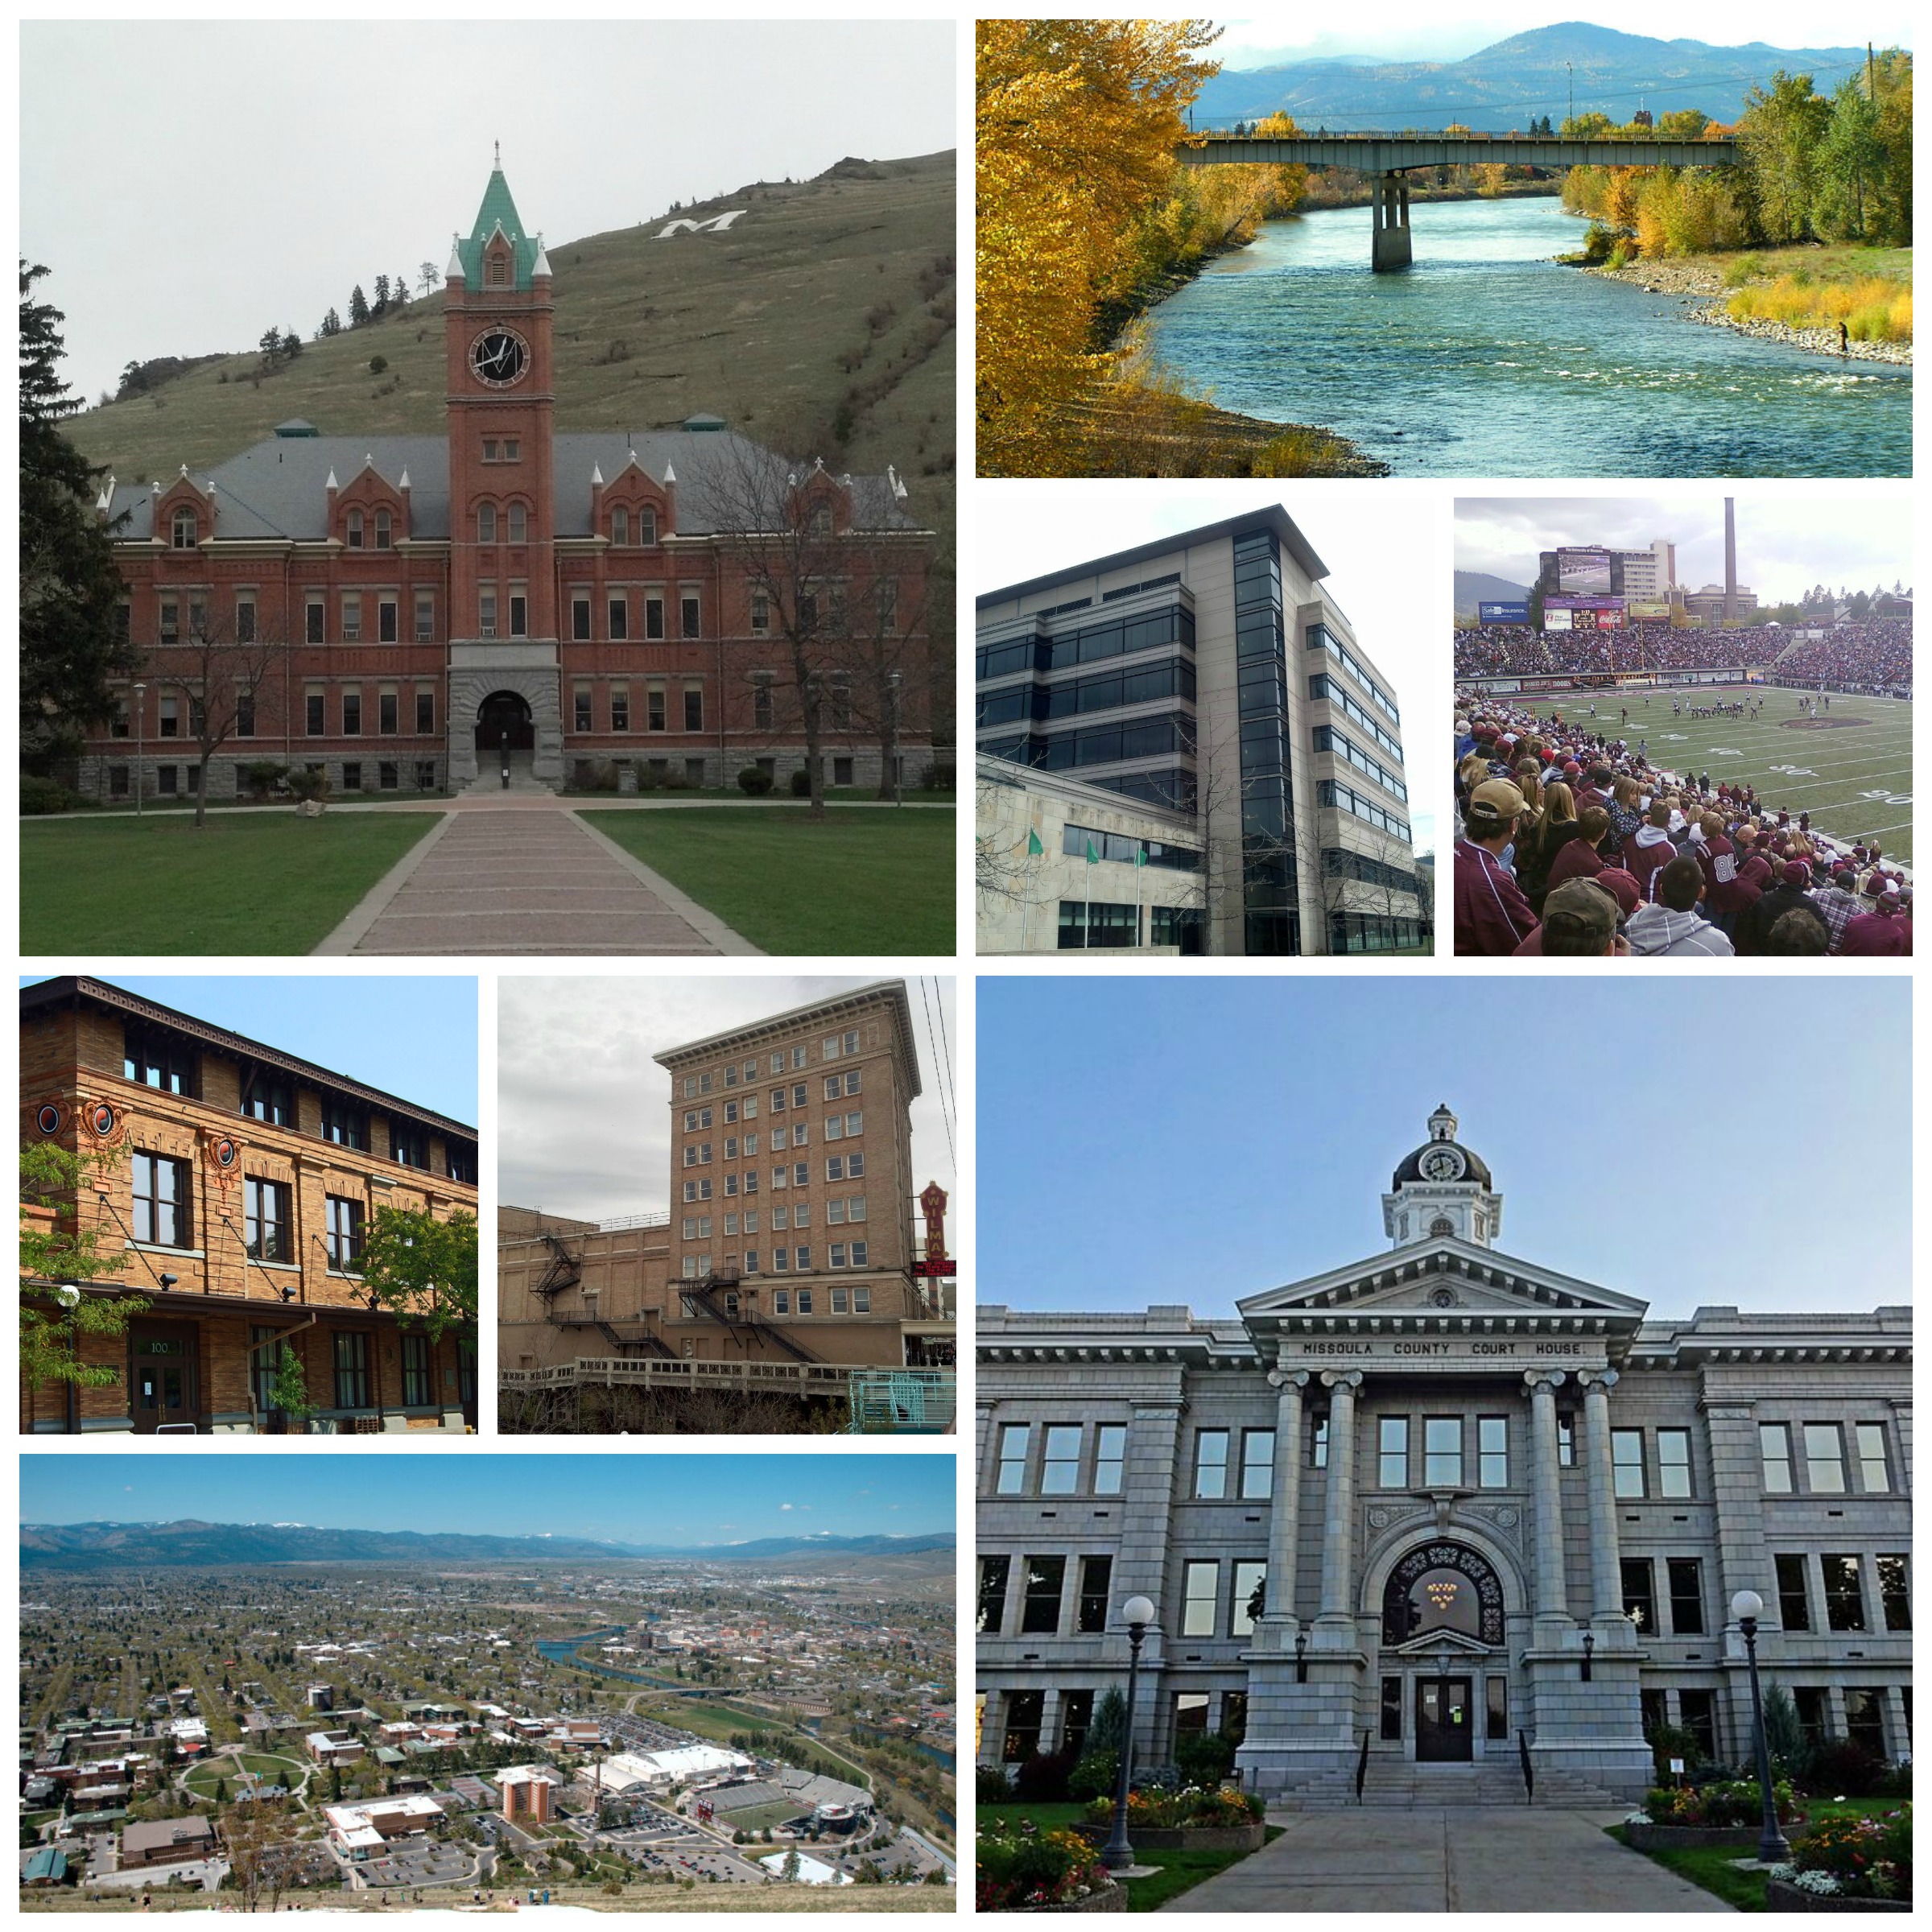 Missoula (  mih-ZOO-lə; Séliš: Nłʔay, lit. 'Place of the Small Bull Trout'; Kutenai: Tuhuⱡnana) is a city in and the county seat of Missoula County, Montana, United States. It is located along the Clark Fork River near its confluence with the Bitterroot and Blackfoot Rivers in western Montana and at the convergence of five mountain ranges, thus it is often described as the "hub of five valleys". The 2020 United States Census shows the city's population at 73,489 and the population of the Missoula Metropolitan Area at 117,922. After Billings, Missoula is the second-largest city and metropolitan area in Montana. Missoula is home to the University of Montana, a public research university.
The Missoula area began seeing settlement by people of European descent in 1858 including William T. Hamilton, who set up a trading post along the Rattlesnake Creek, Captain Richard Grant, who settled near Grant Creek, and David Pattee, who settled near Pattee Canyon. Missoula was founded in 1860 as Hellgate Trading Post while still part of Washington Territory. By 1866, the settlement had moved east, 5 miles (8 km) upstream, and had been renamed Missoula Mills, later shortened to Missoula. The mills provided supplies to western settlers traveling along the Mullan Road. The establishment of Fort Missoula in 1877 to protect settlers further stabilized the economy. The arrival of the Northern Pacific Railway in 1883 brought rapid growth and the maturation of the local lumber industry. In 1893, the Montana Legislature chose Missoula as the site for the state's first university. Along with the U.S. Forest Service headquarters founded in 1908, lumber and the university remained the basis of the local economy for the next 100 years.By the 1990s, Missoula's lumber industry had gradually disappeared, and as of 2009, the city's largest employers were the University of Montana, Missoula County Public Schools, and Missoula's two hospitals. The city is governed by a mayor–council government with 12 city council members, two from each of the six wards. In and around Missoula are 400 acres (160 ha) of parkland, 22 miles (35 km) of trails, and nearly 5,000 acres (2,000 ha) of open-space conservation land, with adjacent Mount Jumbo being home to grazing elk and mule deer during the winter. The city is also home to both of Montana's largest and its oldest active breweries, as well as the Montana Grizzlies. Notable residents include the first woman to serve in the U.S. Congress, Jeannette Rankin.